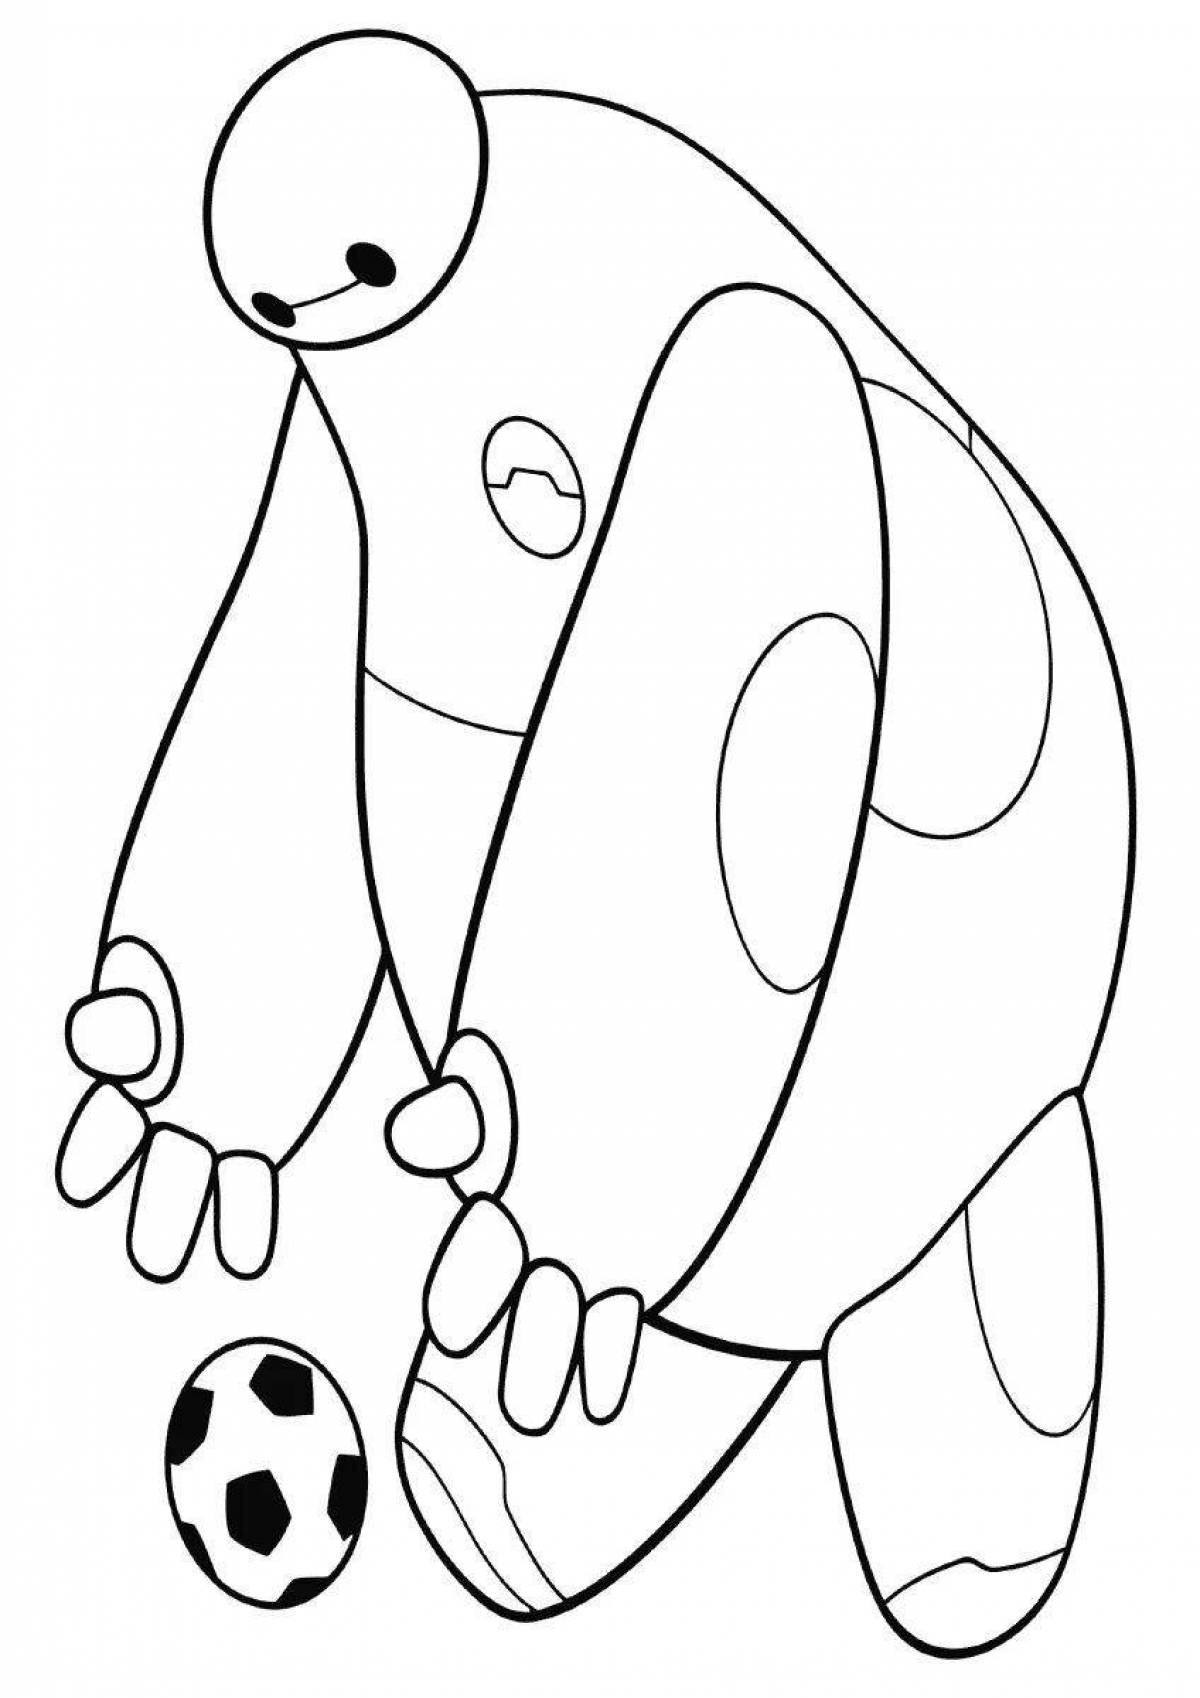 Colouring brave baymax